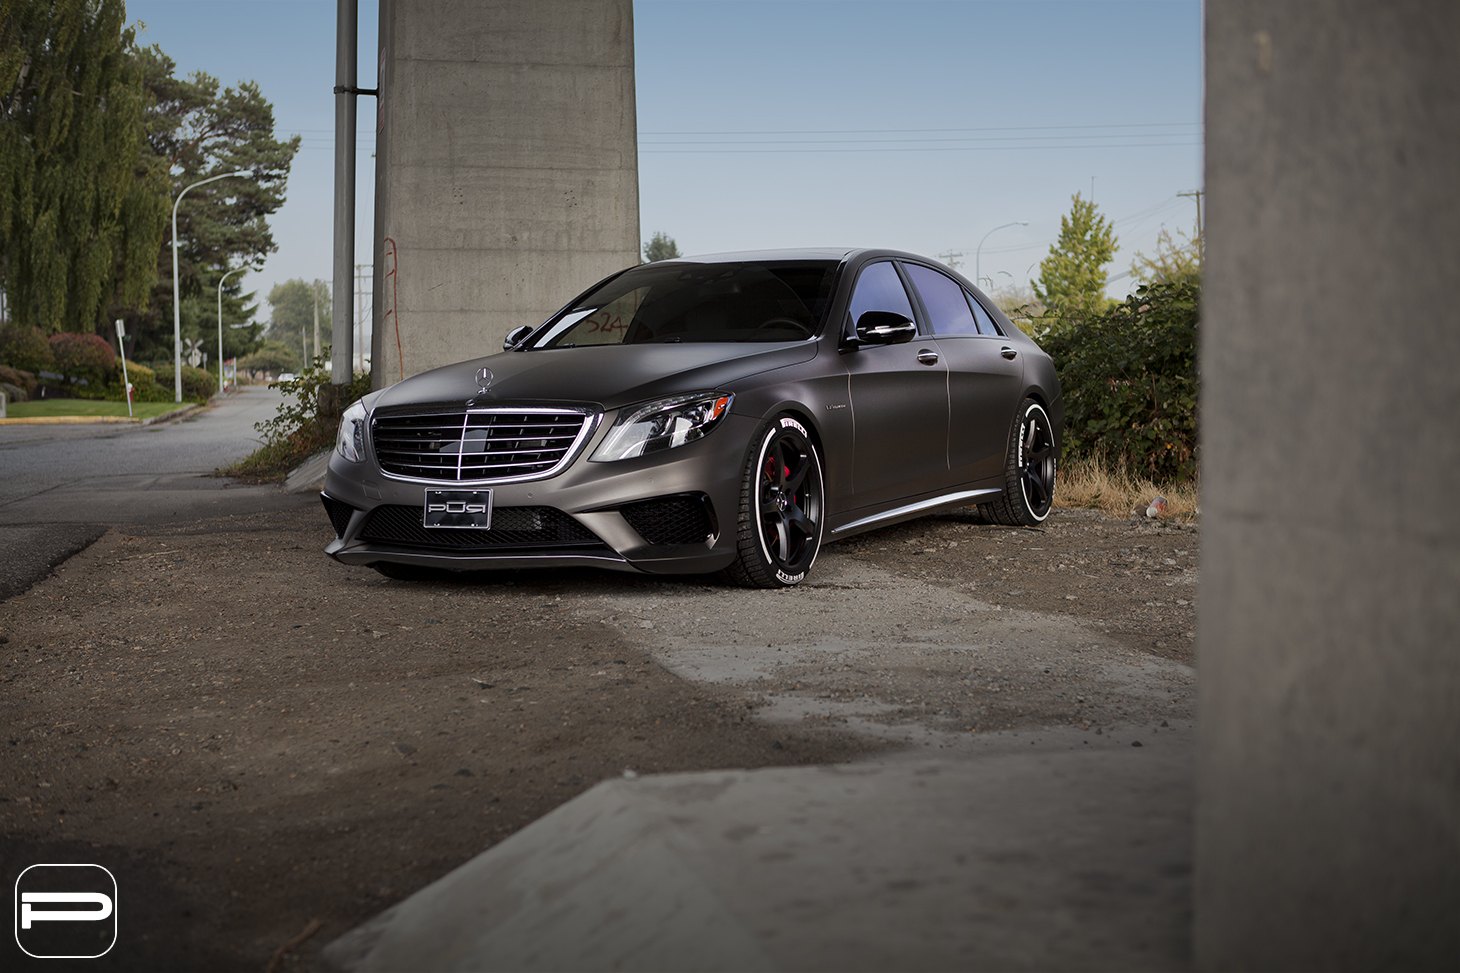 Chrome Billet Grille on Gray Mercedes S Class - Photo by PUR Wheels